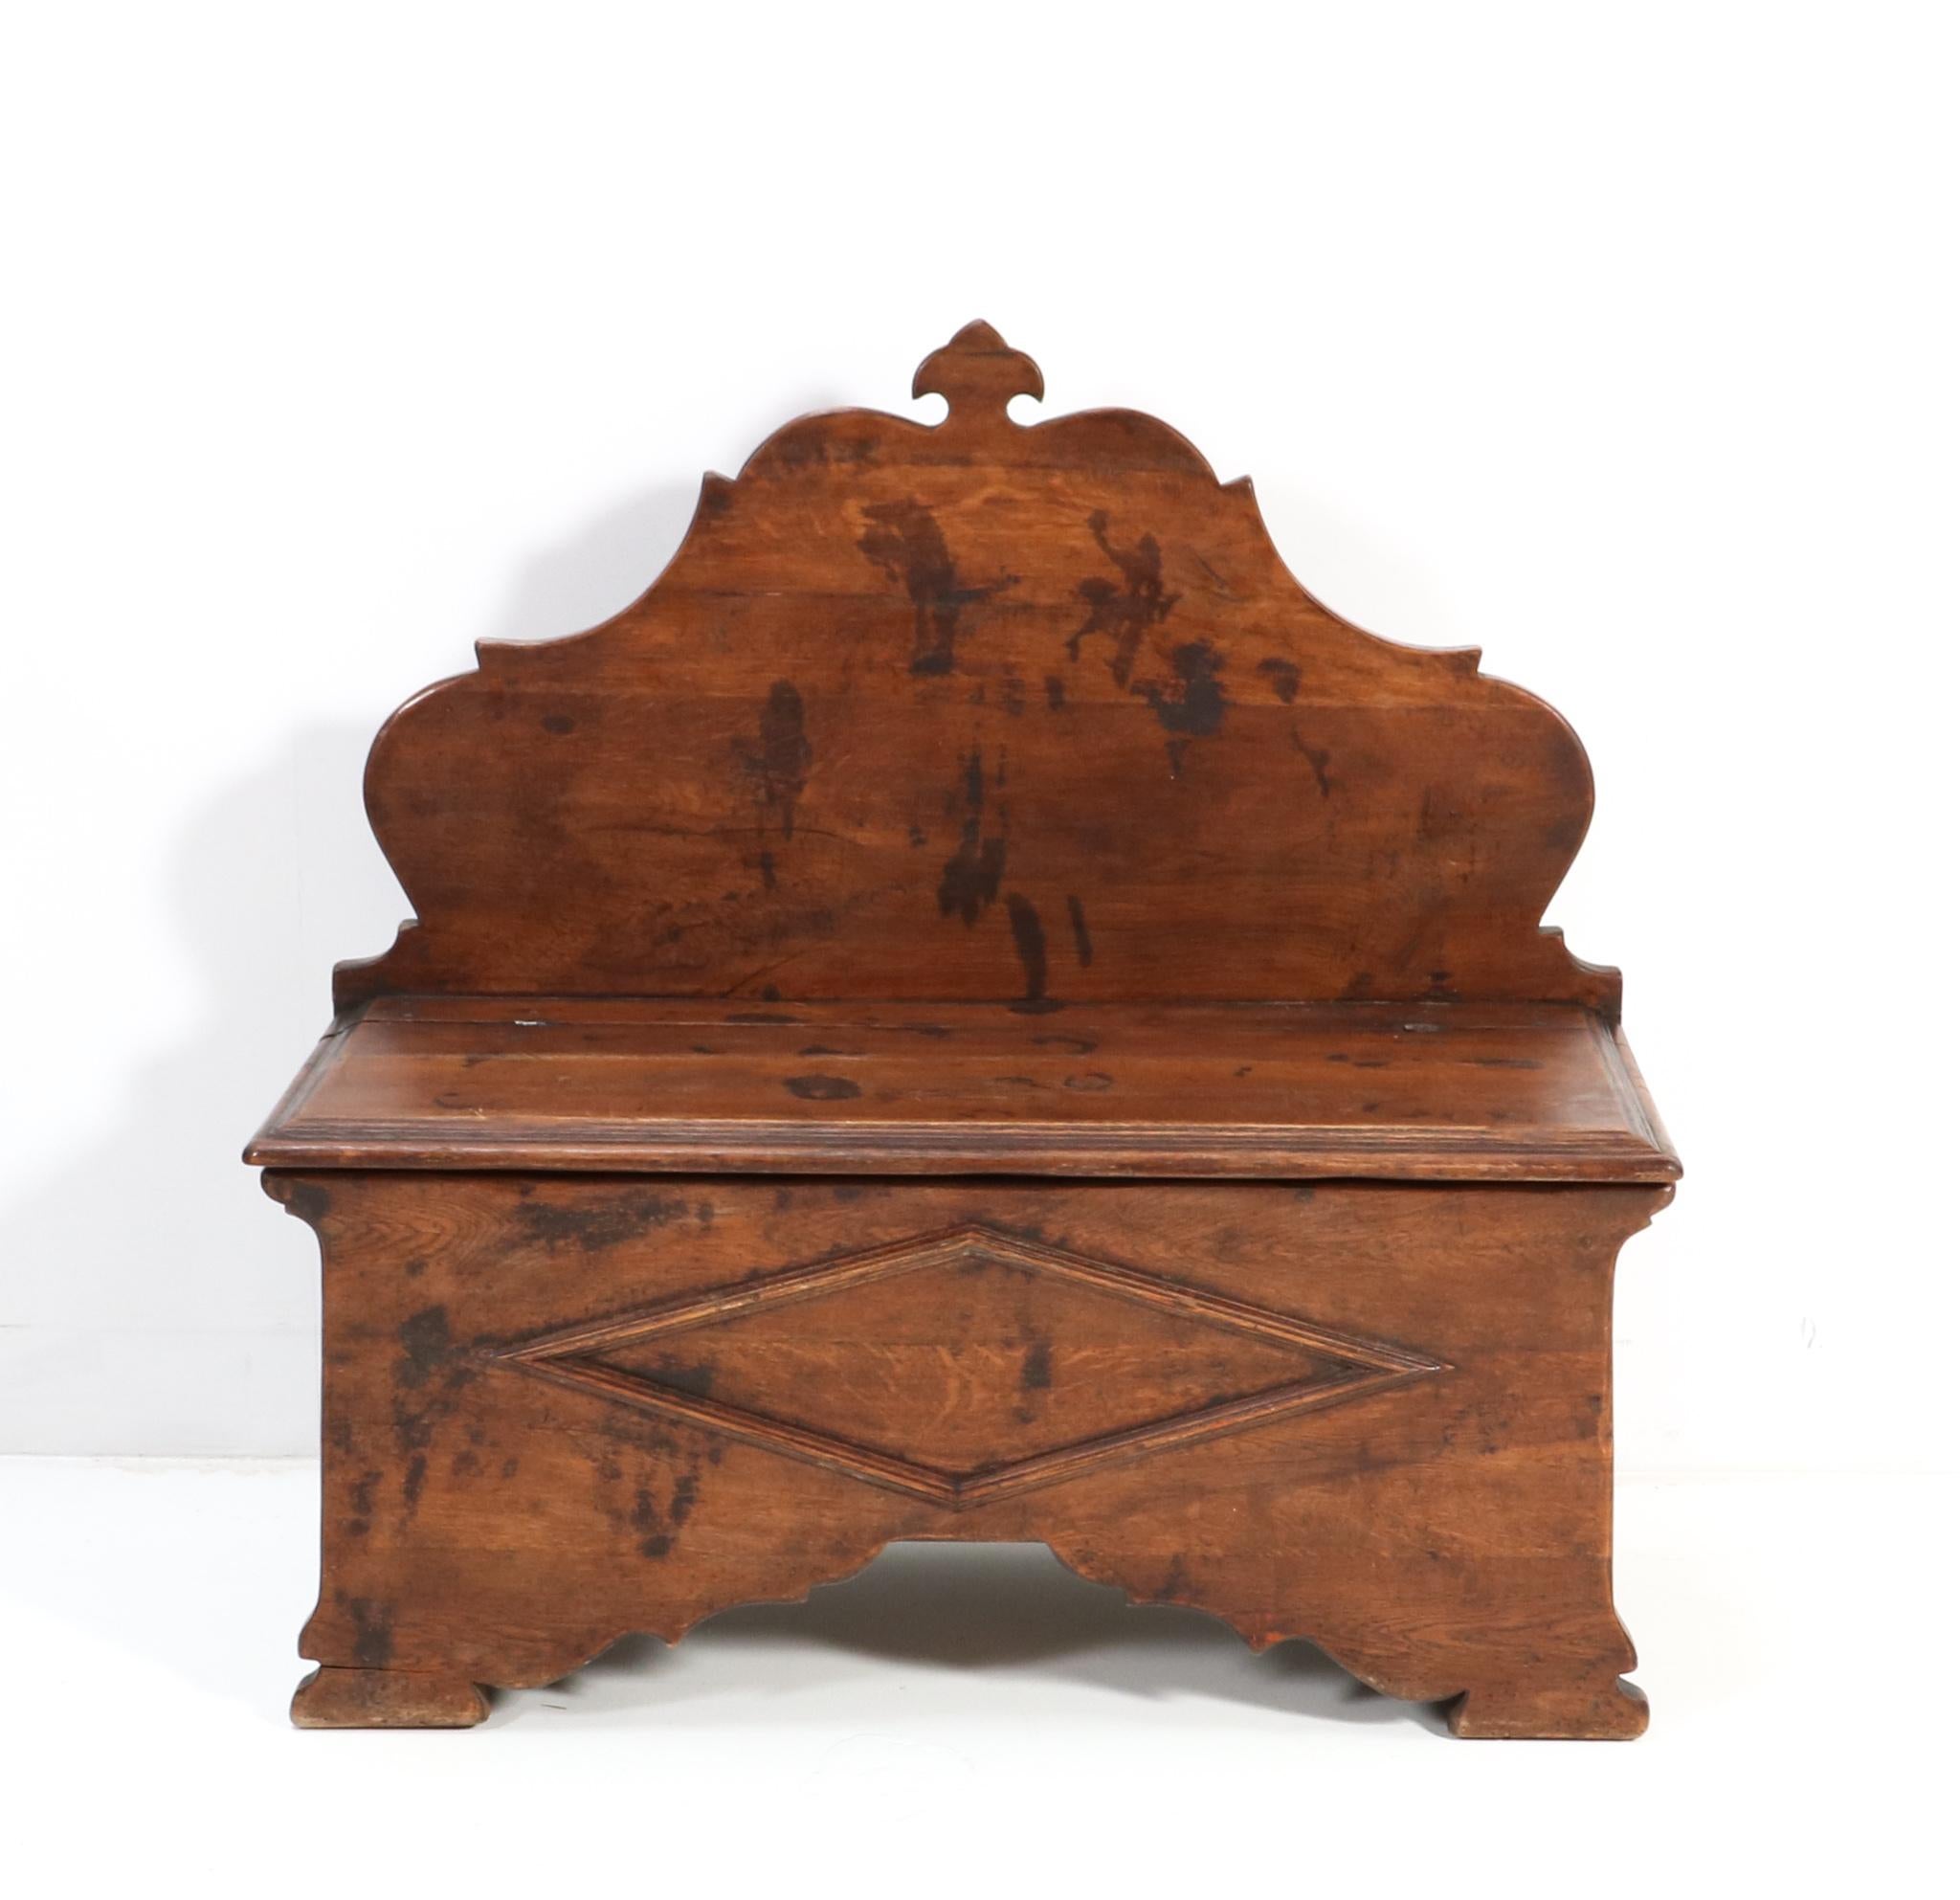 Stunning French Provincial rustic hall bench.
Striking French design from the 1900s.
Solid oak frame with storage space underneath the seat.
This wonderful French Provincial has a rustic look and is very good condition with a beautiful patina.